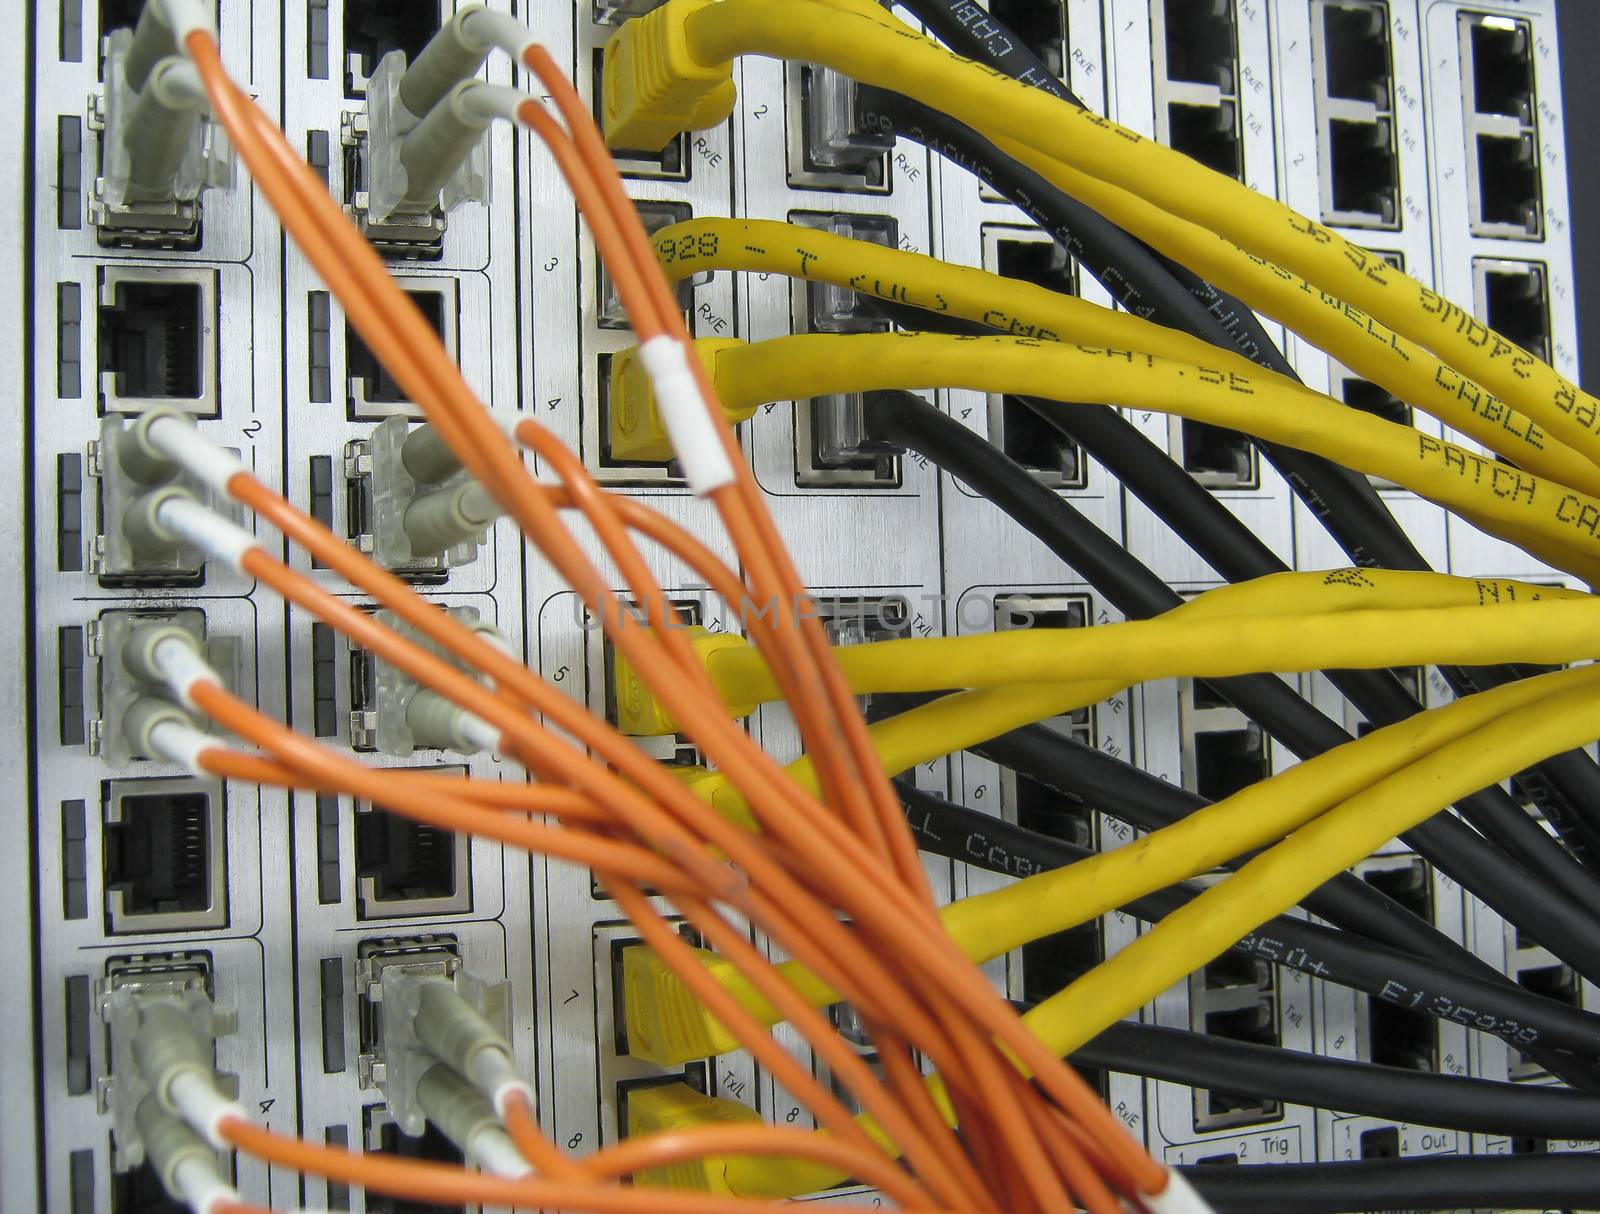 Internet service provider communications equipment installed in a large datacenter.